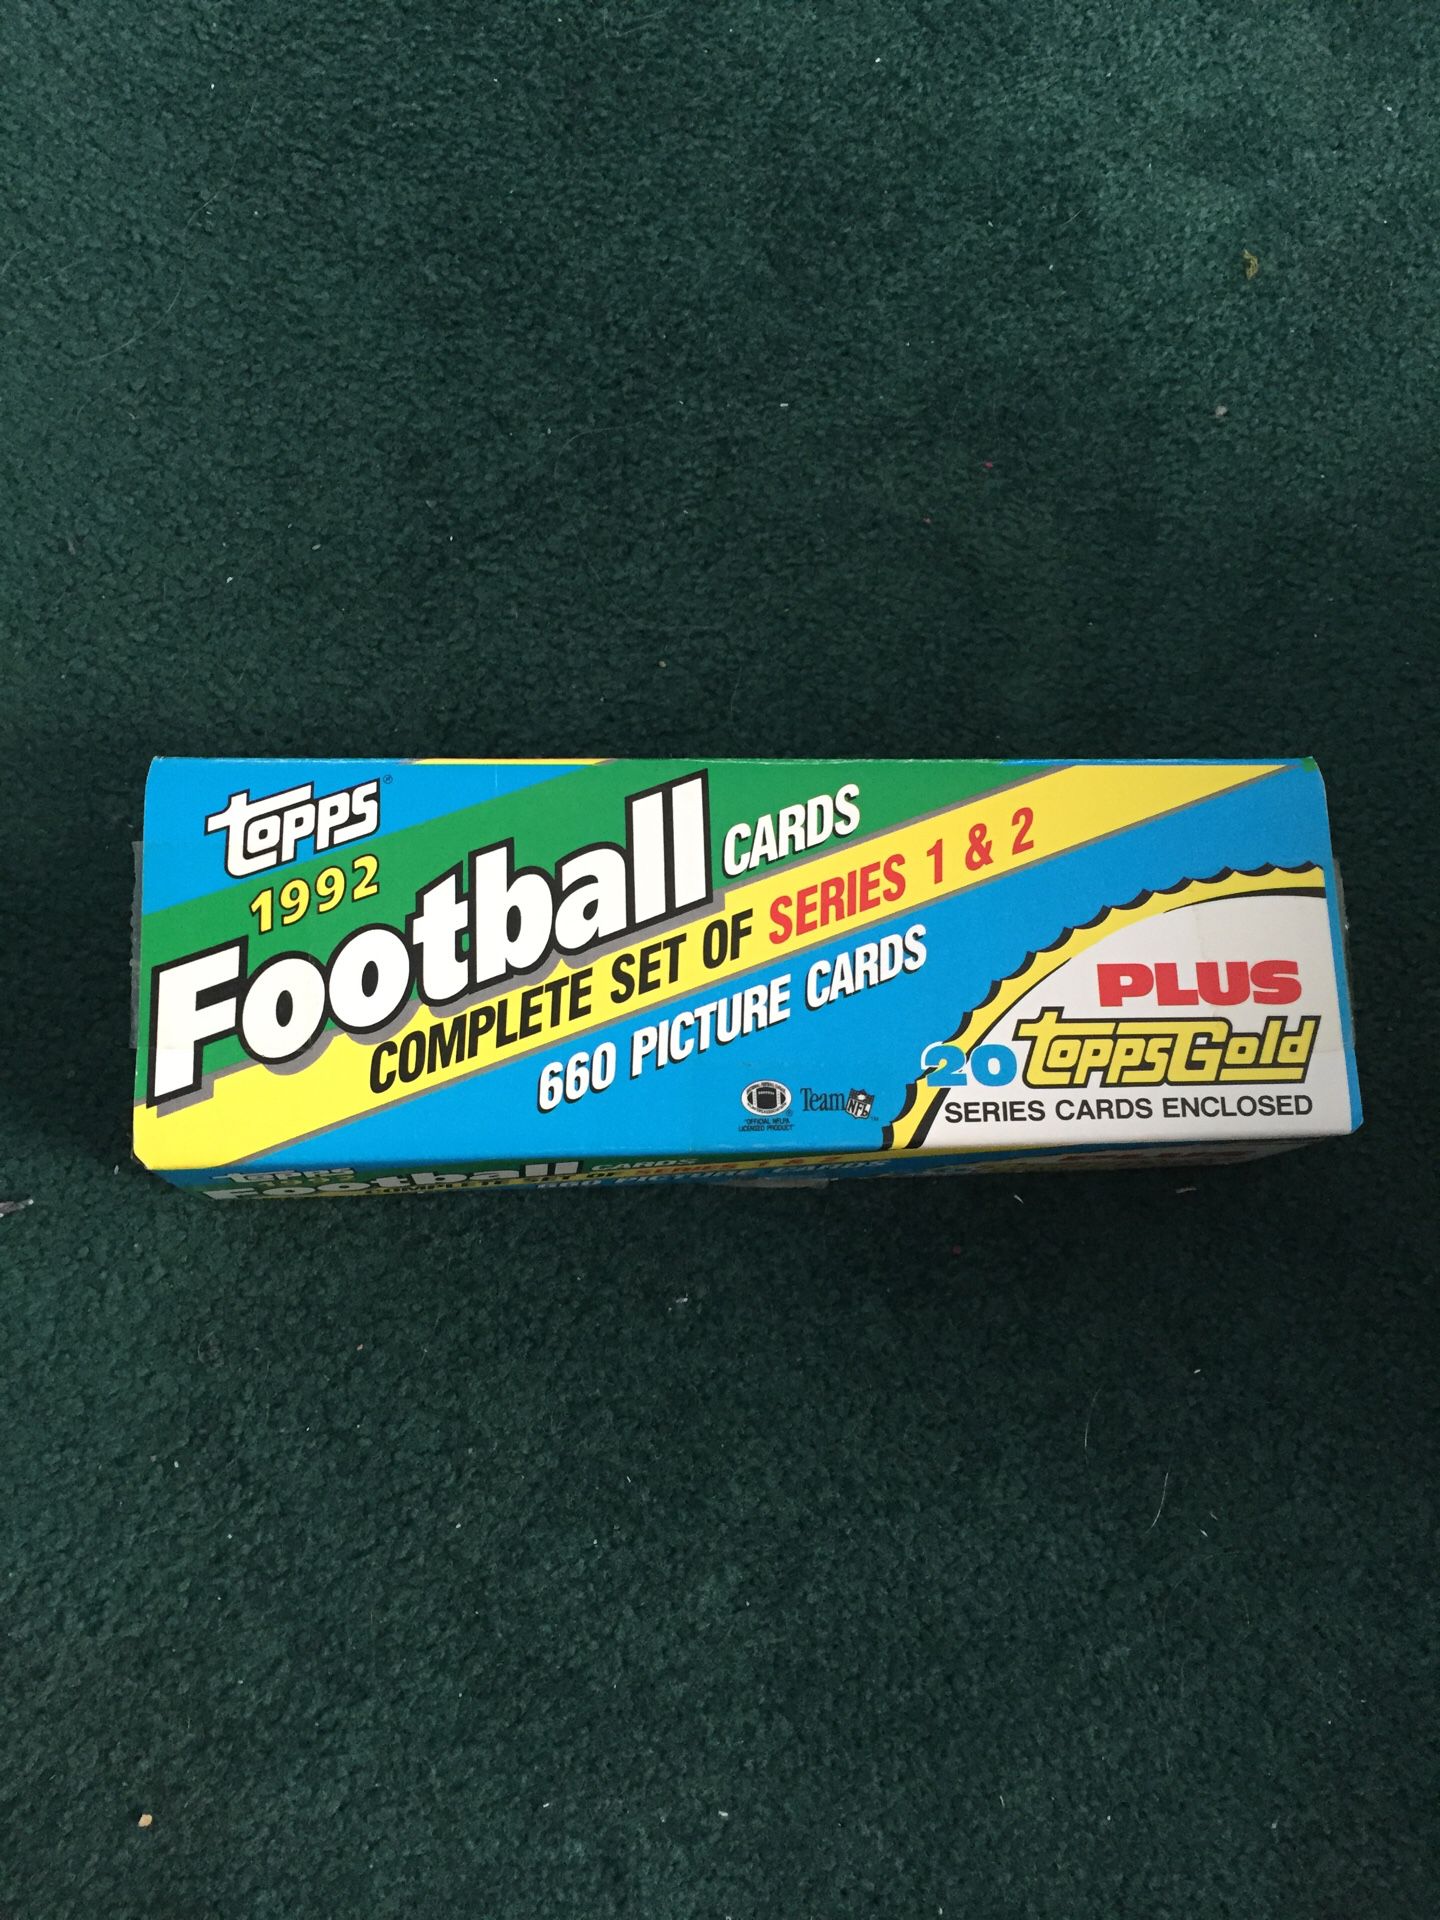 1992 Topps Football card, series 1 and 2